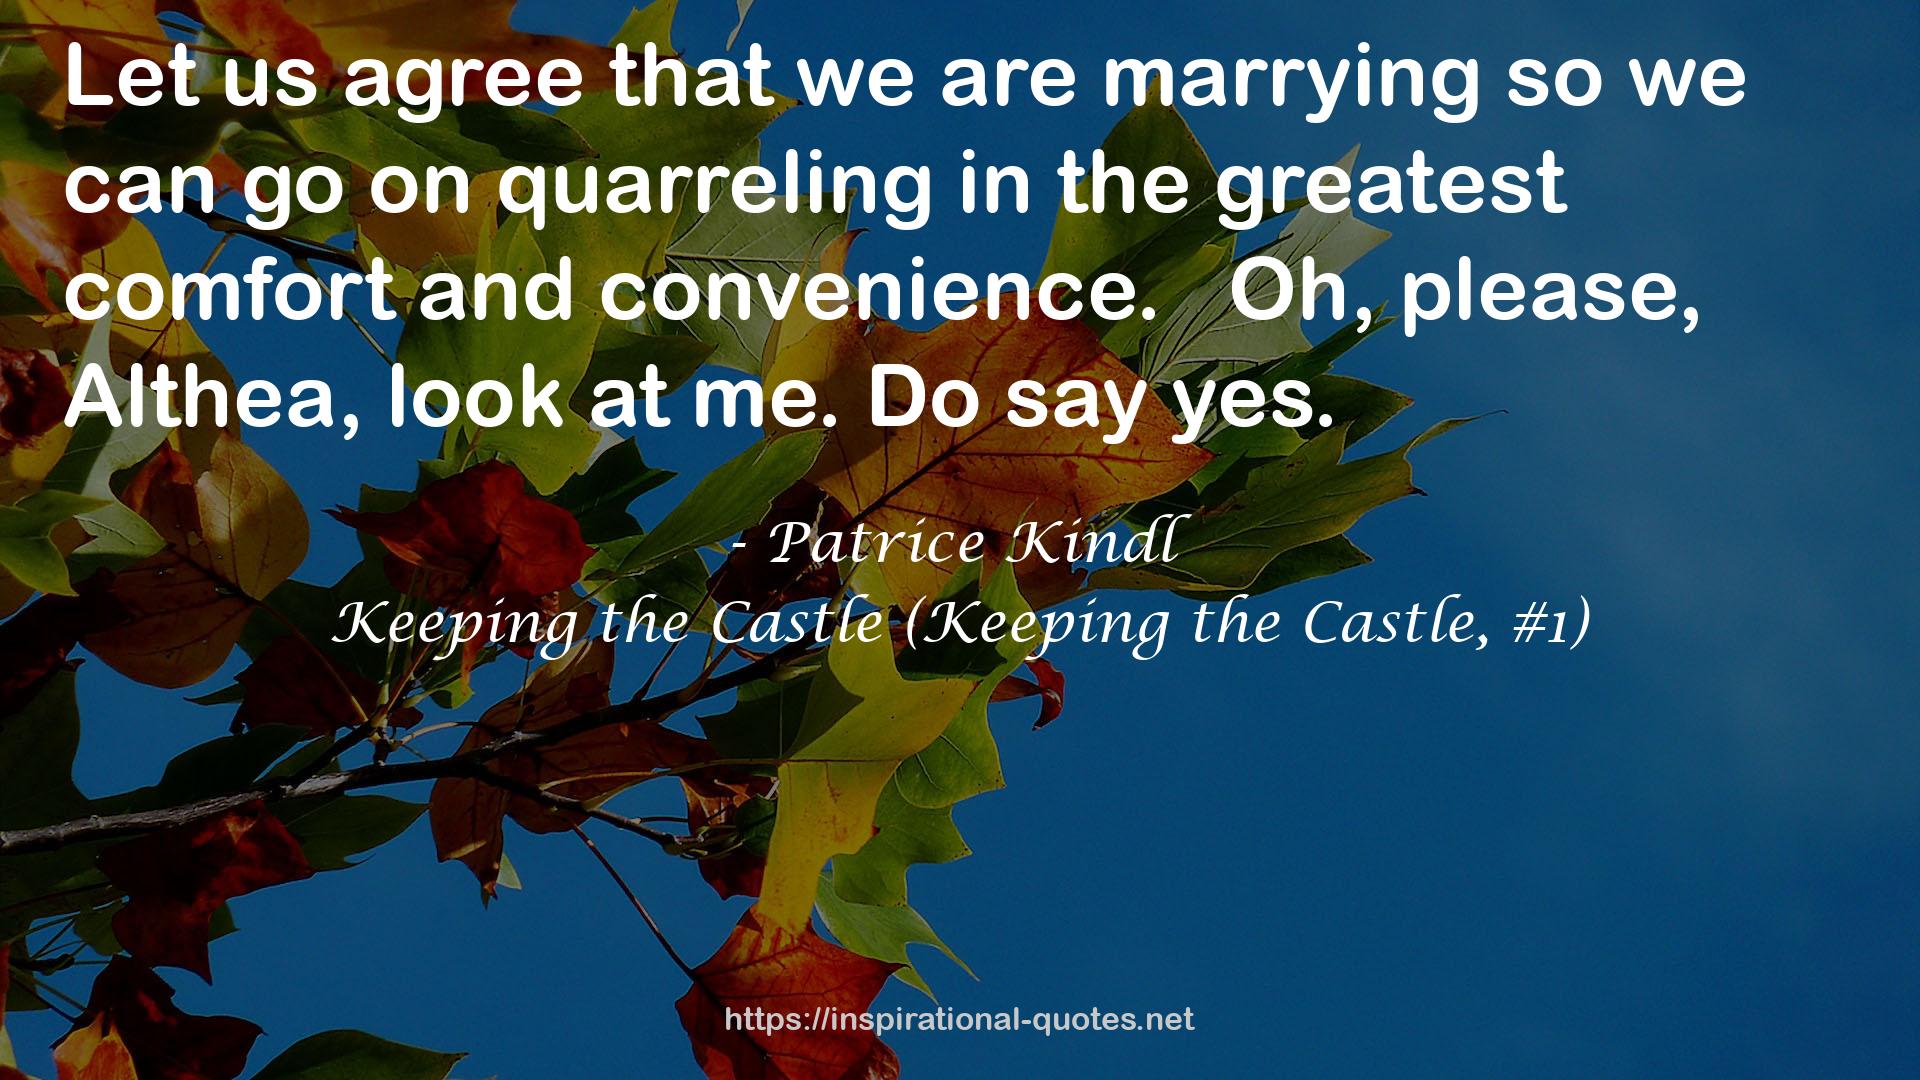 Keeping the Castle (Keeping the Castle, #1) QUOTES